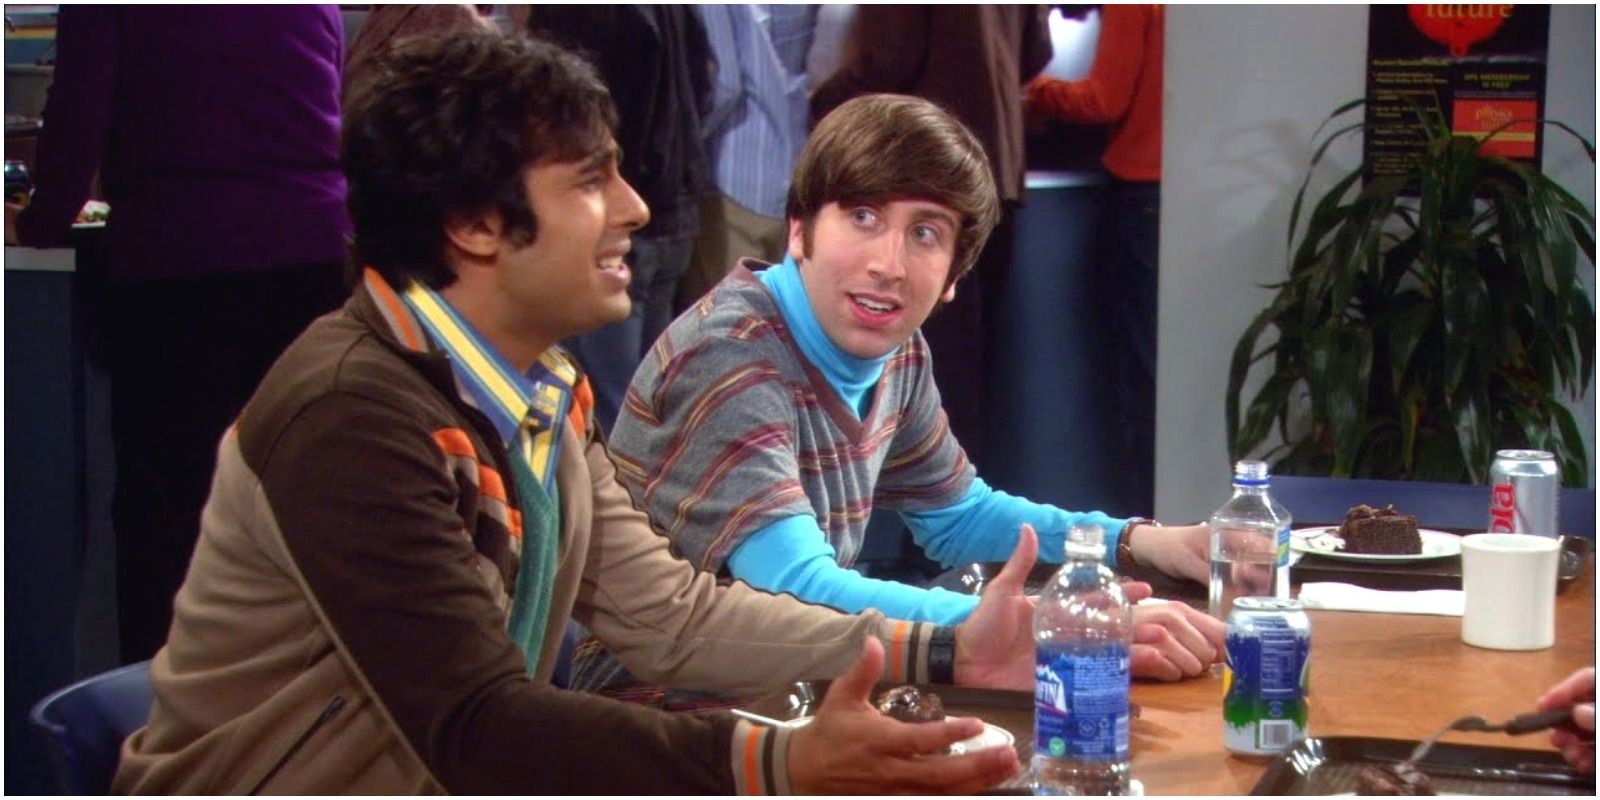 Howard and Raj being a stereotypical couple from the Big Bang Theory 